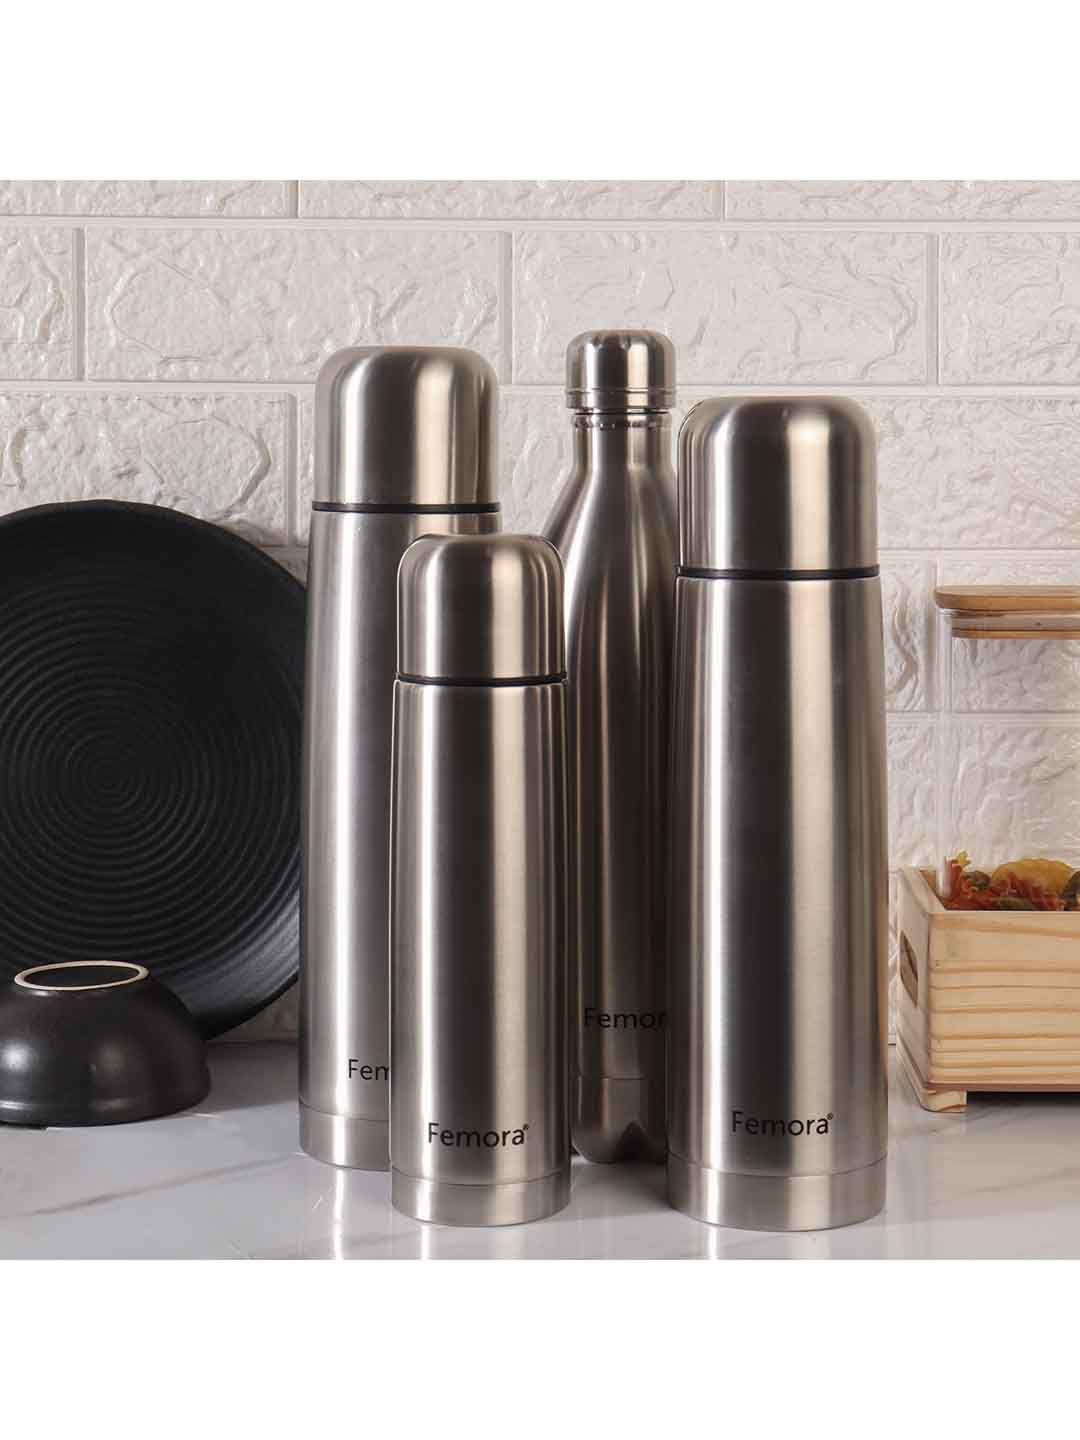 Femora Stainless Steel Solid Water Bottle 1000ml Price in India